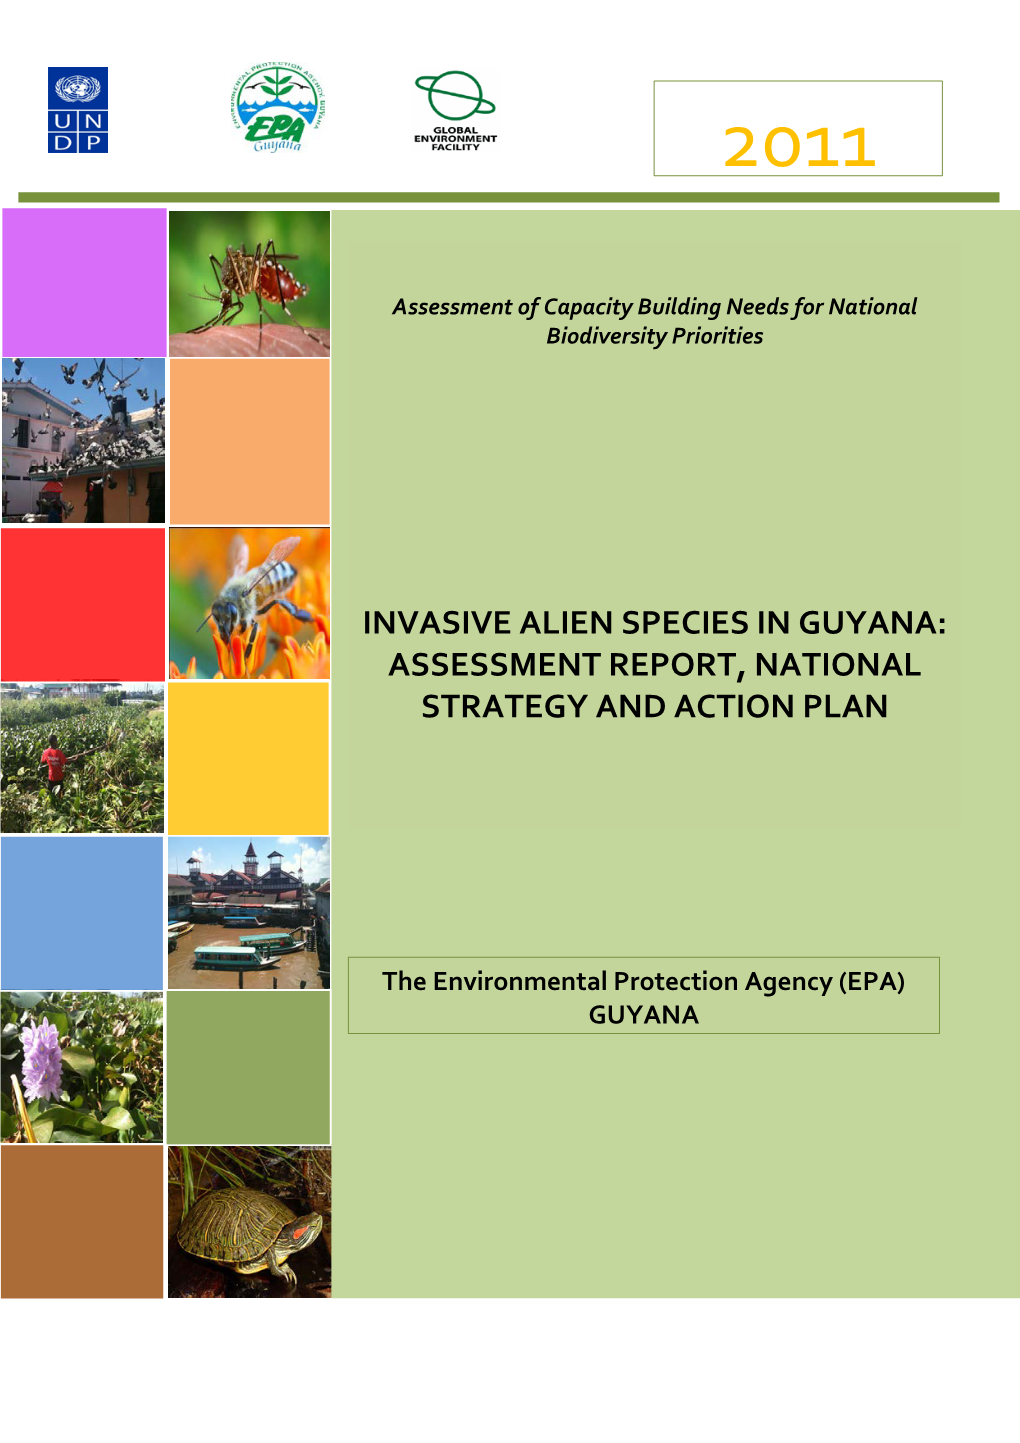 Invasive Alien Species in Guyana: Assessment Report, National Strategy and Action Plan